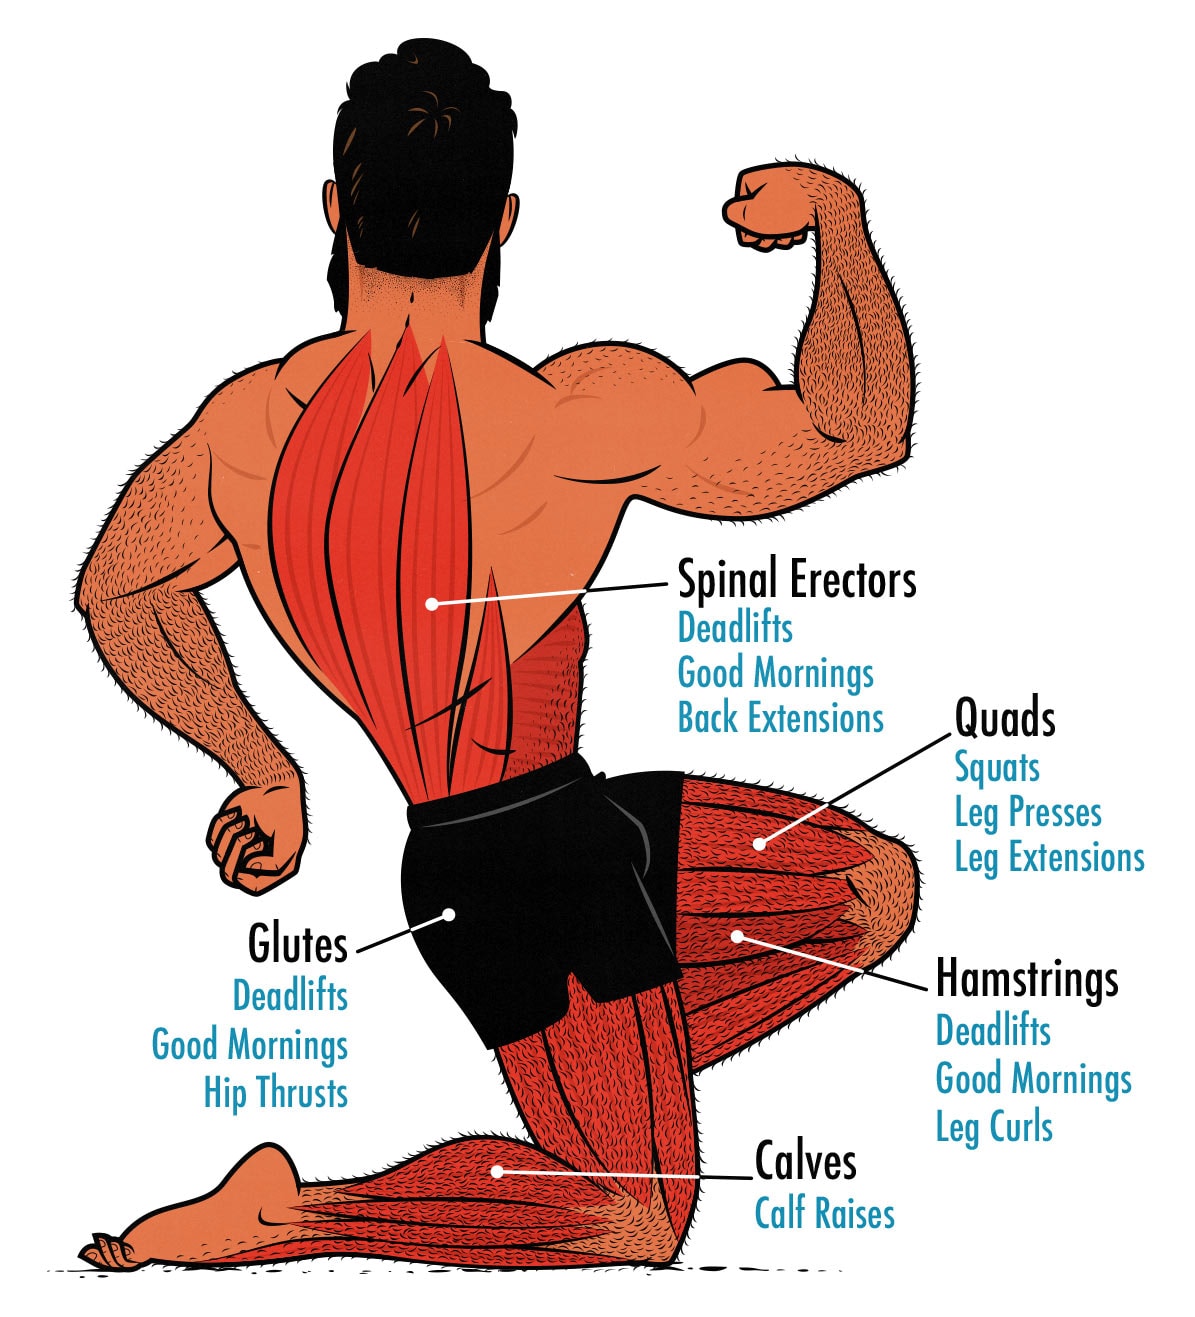 Diagram showing the muscles worked during Leg Day workouts.